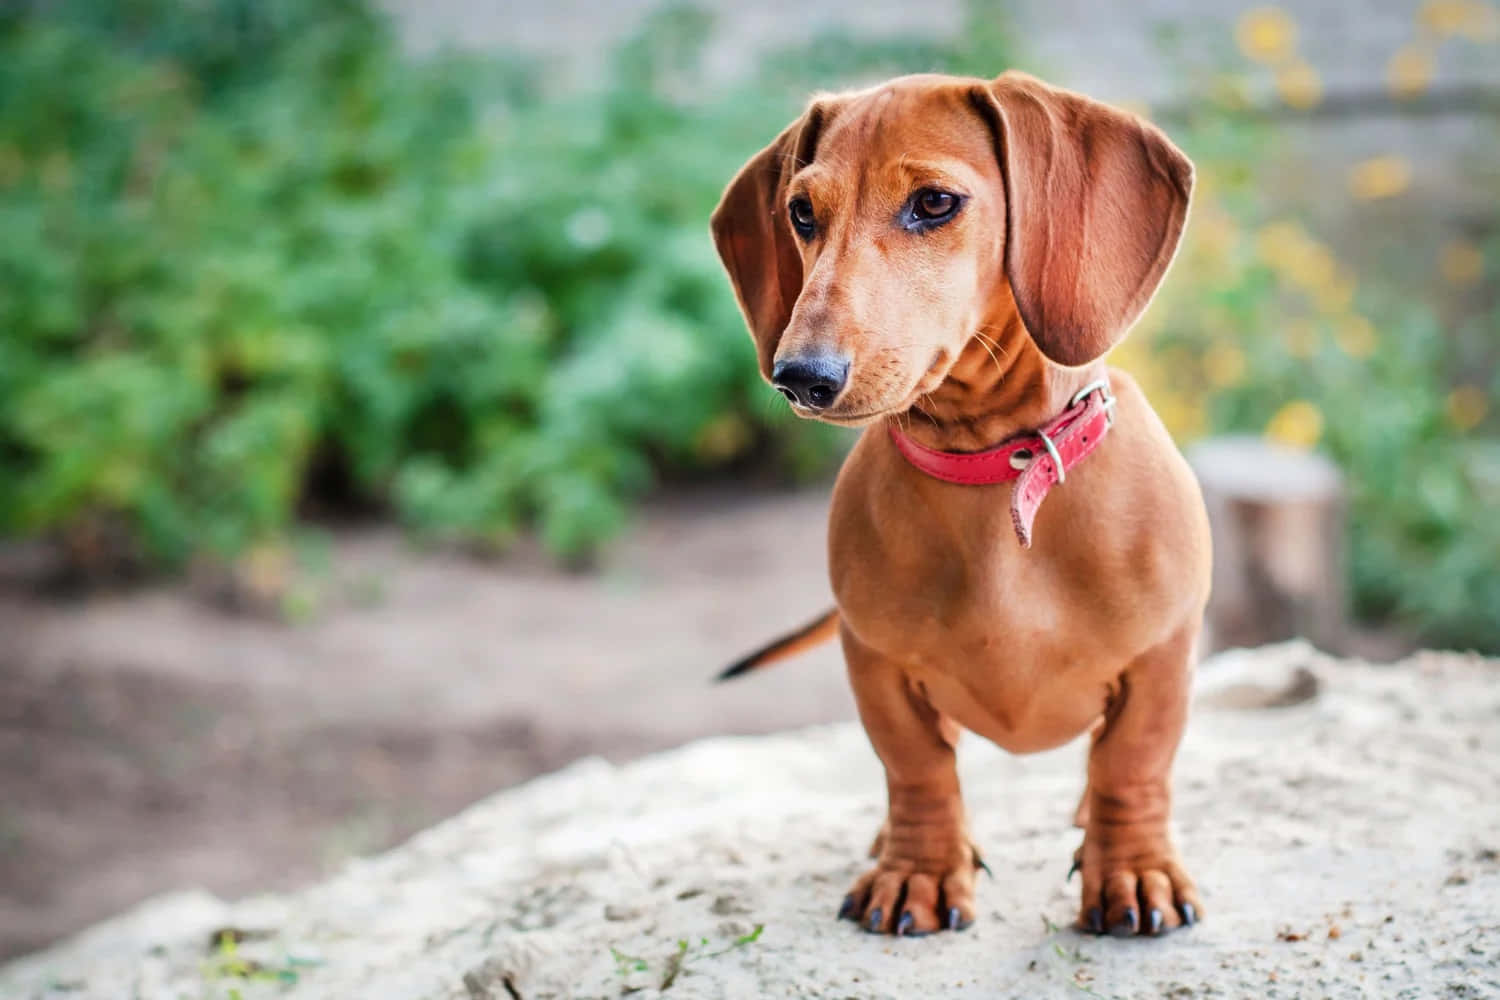 An Adorable Dachschund Puppy Sitting in the Grass